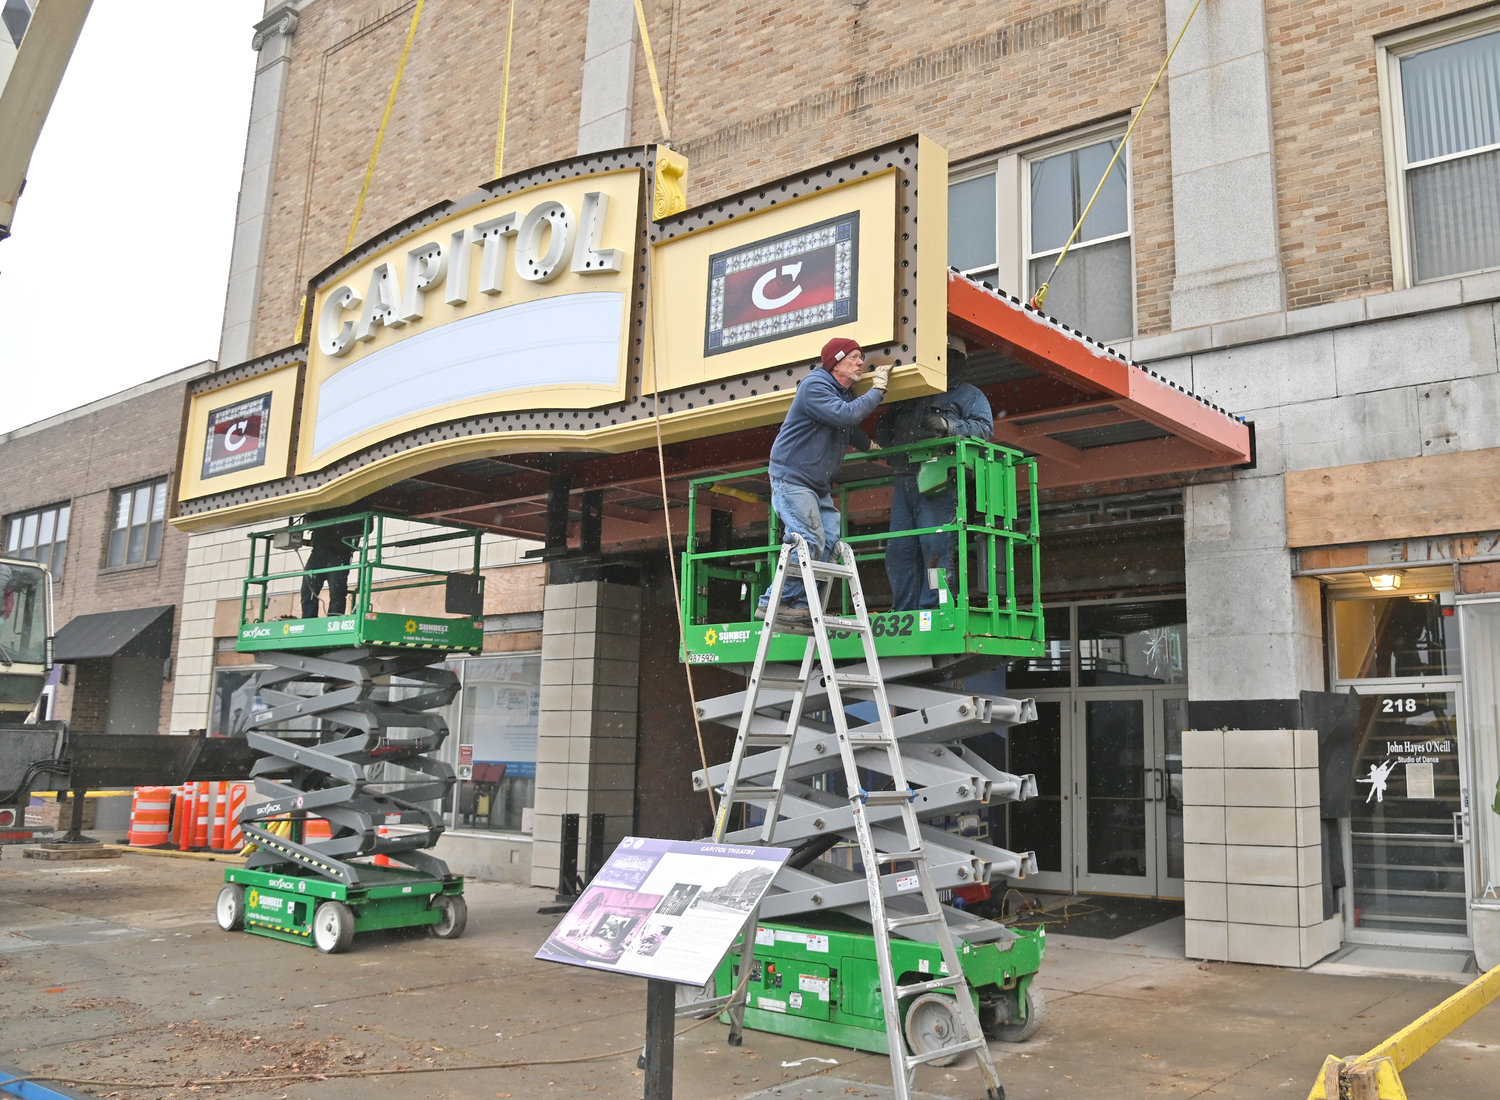 NEW MARQUEE INSTALLATION UNDERWAY — The first part of the new Capitol Theatre marquee is installed at the iconic West Dominick Street landmark on Tuesday afternoon by a crew from the Wagner Electric Sign Company of Elyria, Ohio. The main structure will support a massive 1930s style Capitol sign with a second part of the marquee, a “blade” — 45 1/2 foot sign, to be installed above that on Dec. 7, according to Capitol Theatre officials. The official unveiling of the new marquee — that has been almost 20 years in the works — will be Jan. 15, 2022.